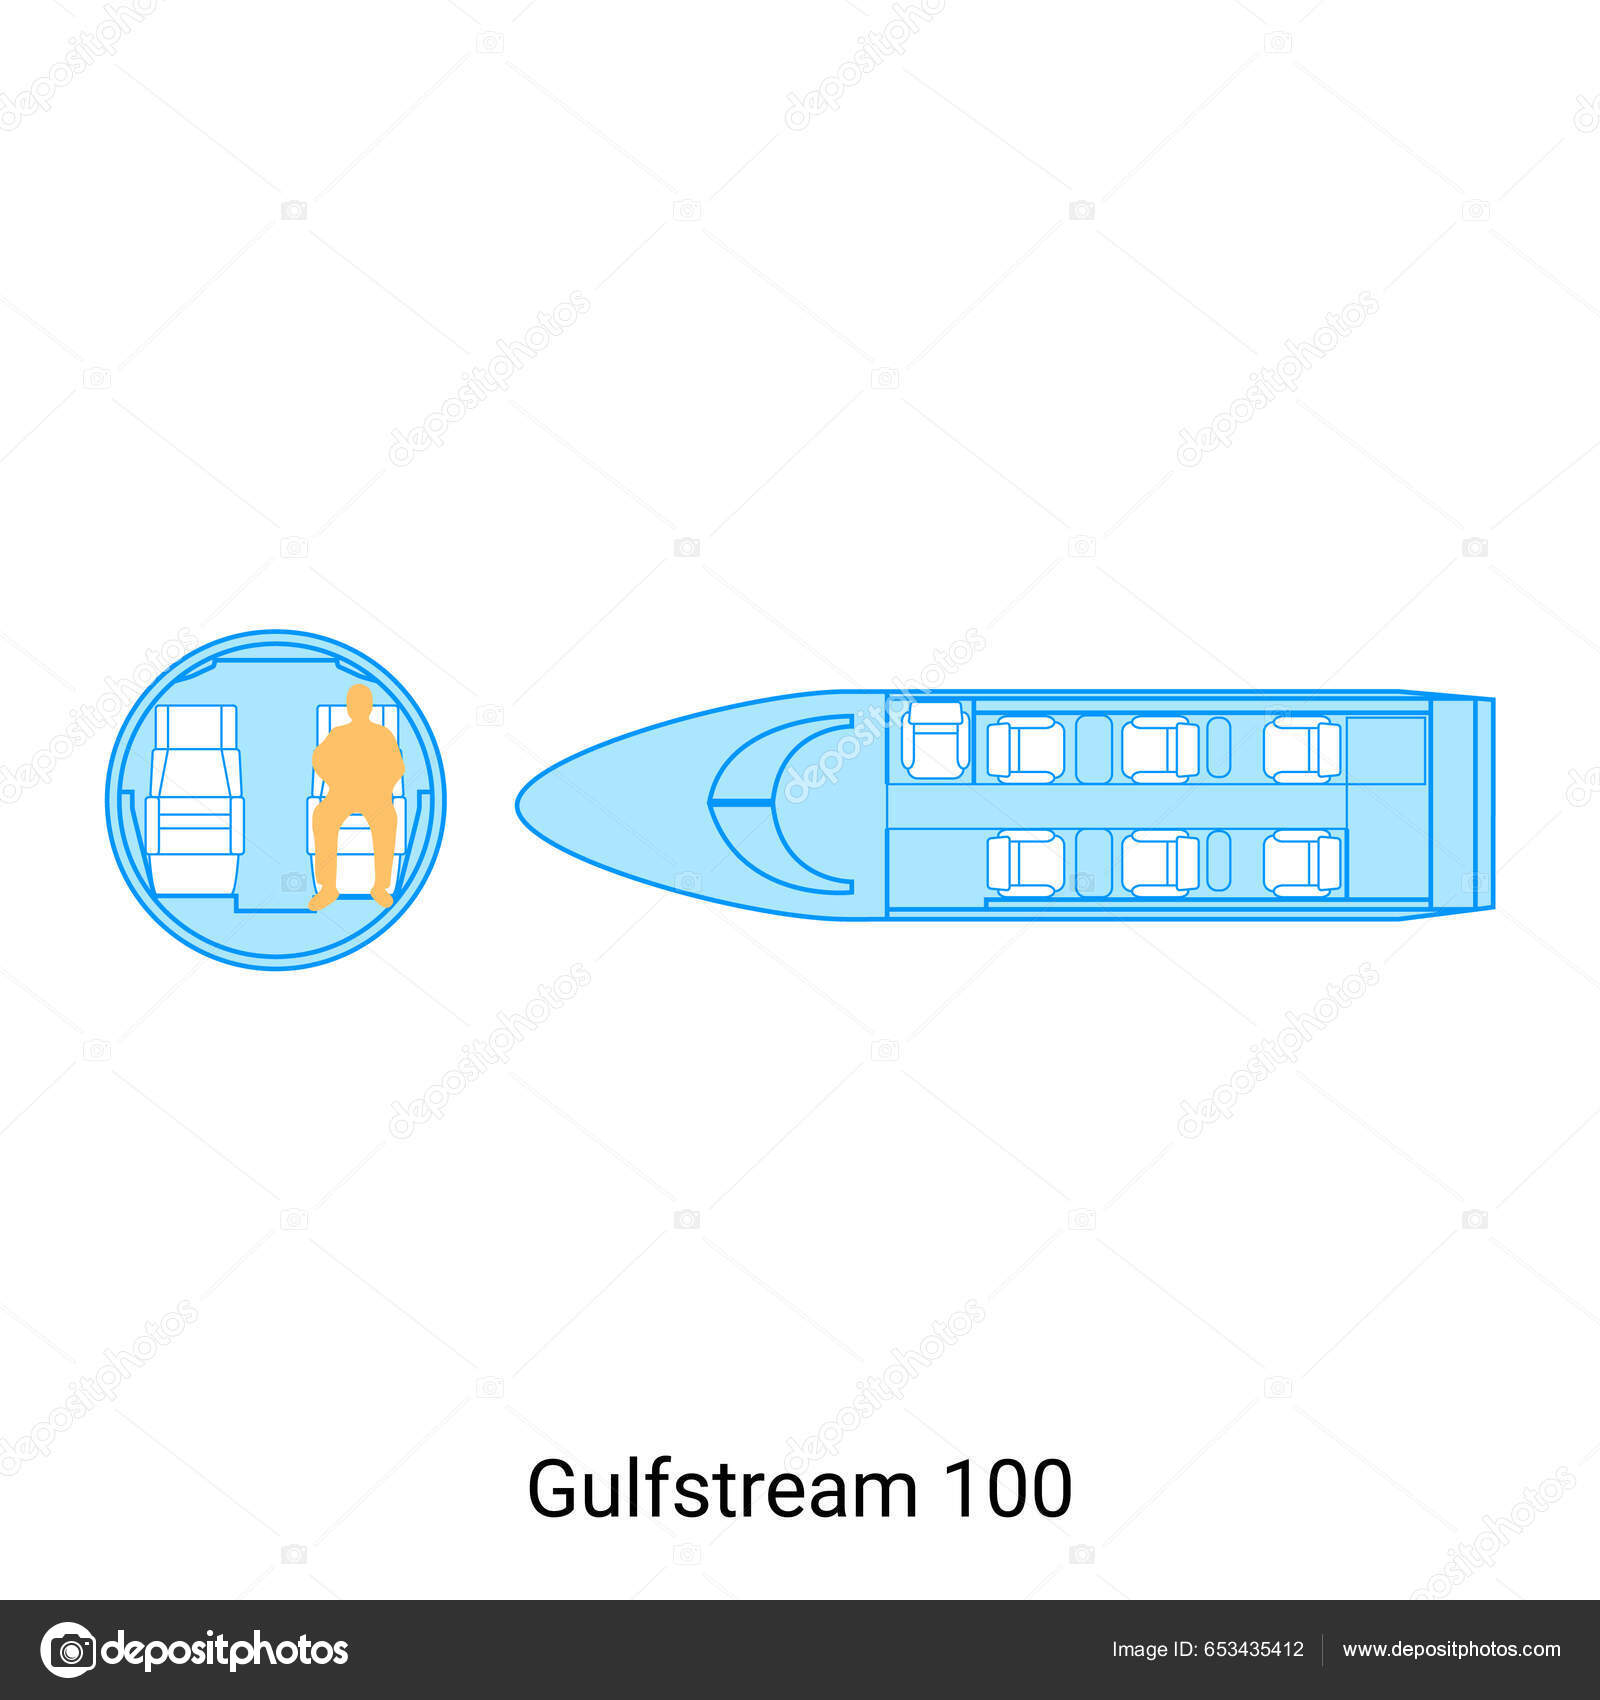 Gulfstream 100 Airplane Scheme Civil Aircraft Guide Stock Vector by ...